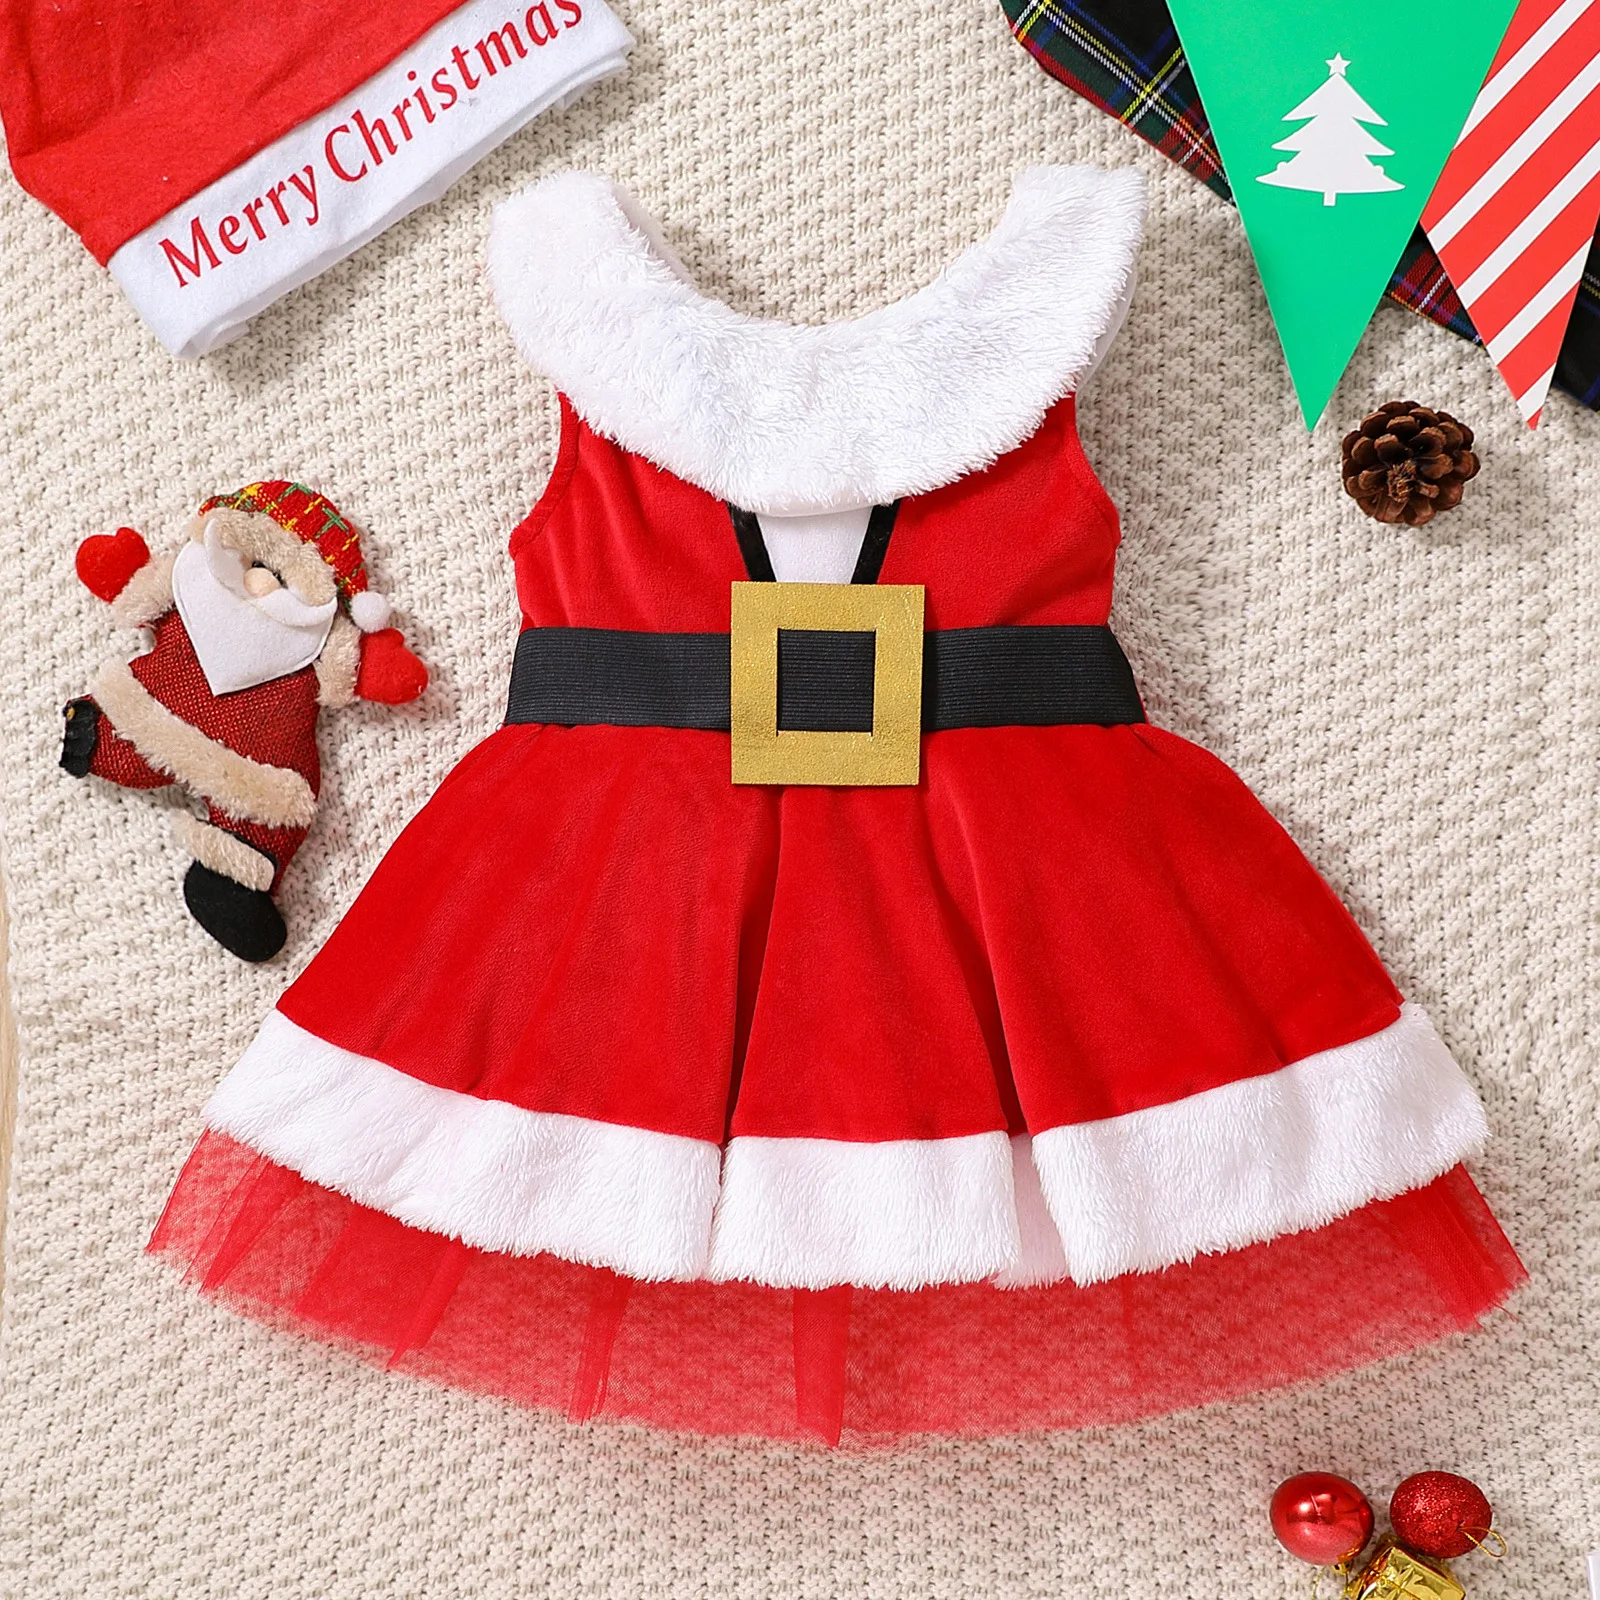 

Toddlers Girl Chirstmas Costume Baby Red Dress Santa Claus Cotton Warm Party Carnival Robe Kids Winter Festival Clothes